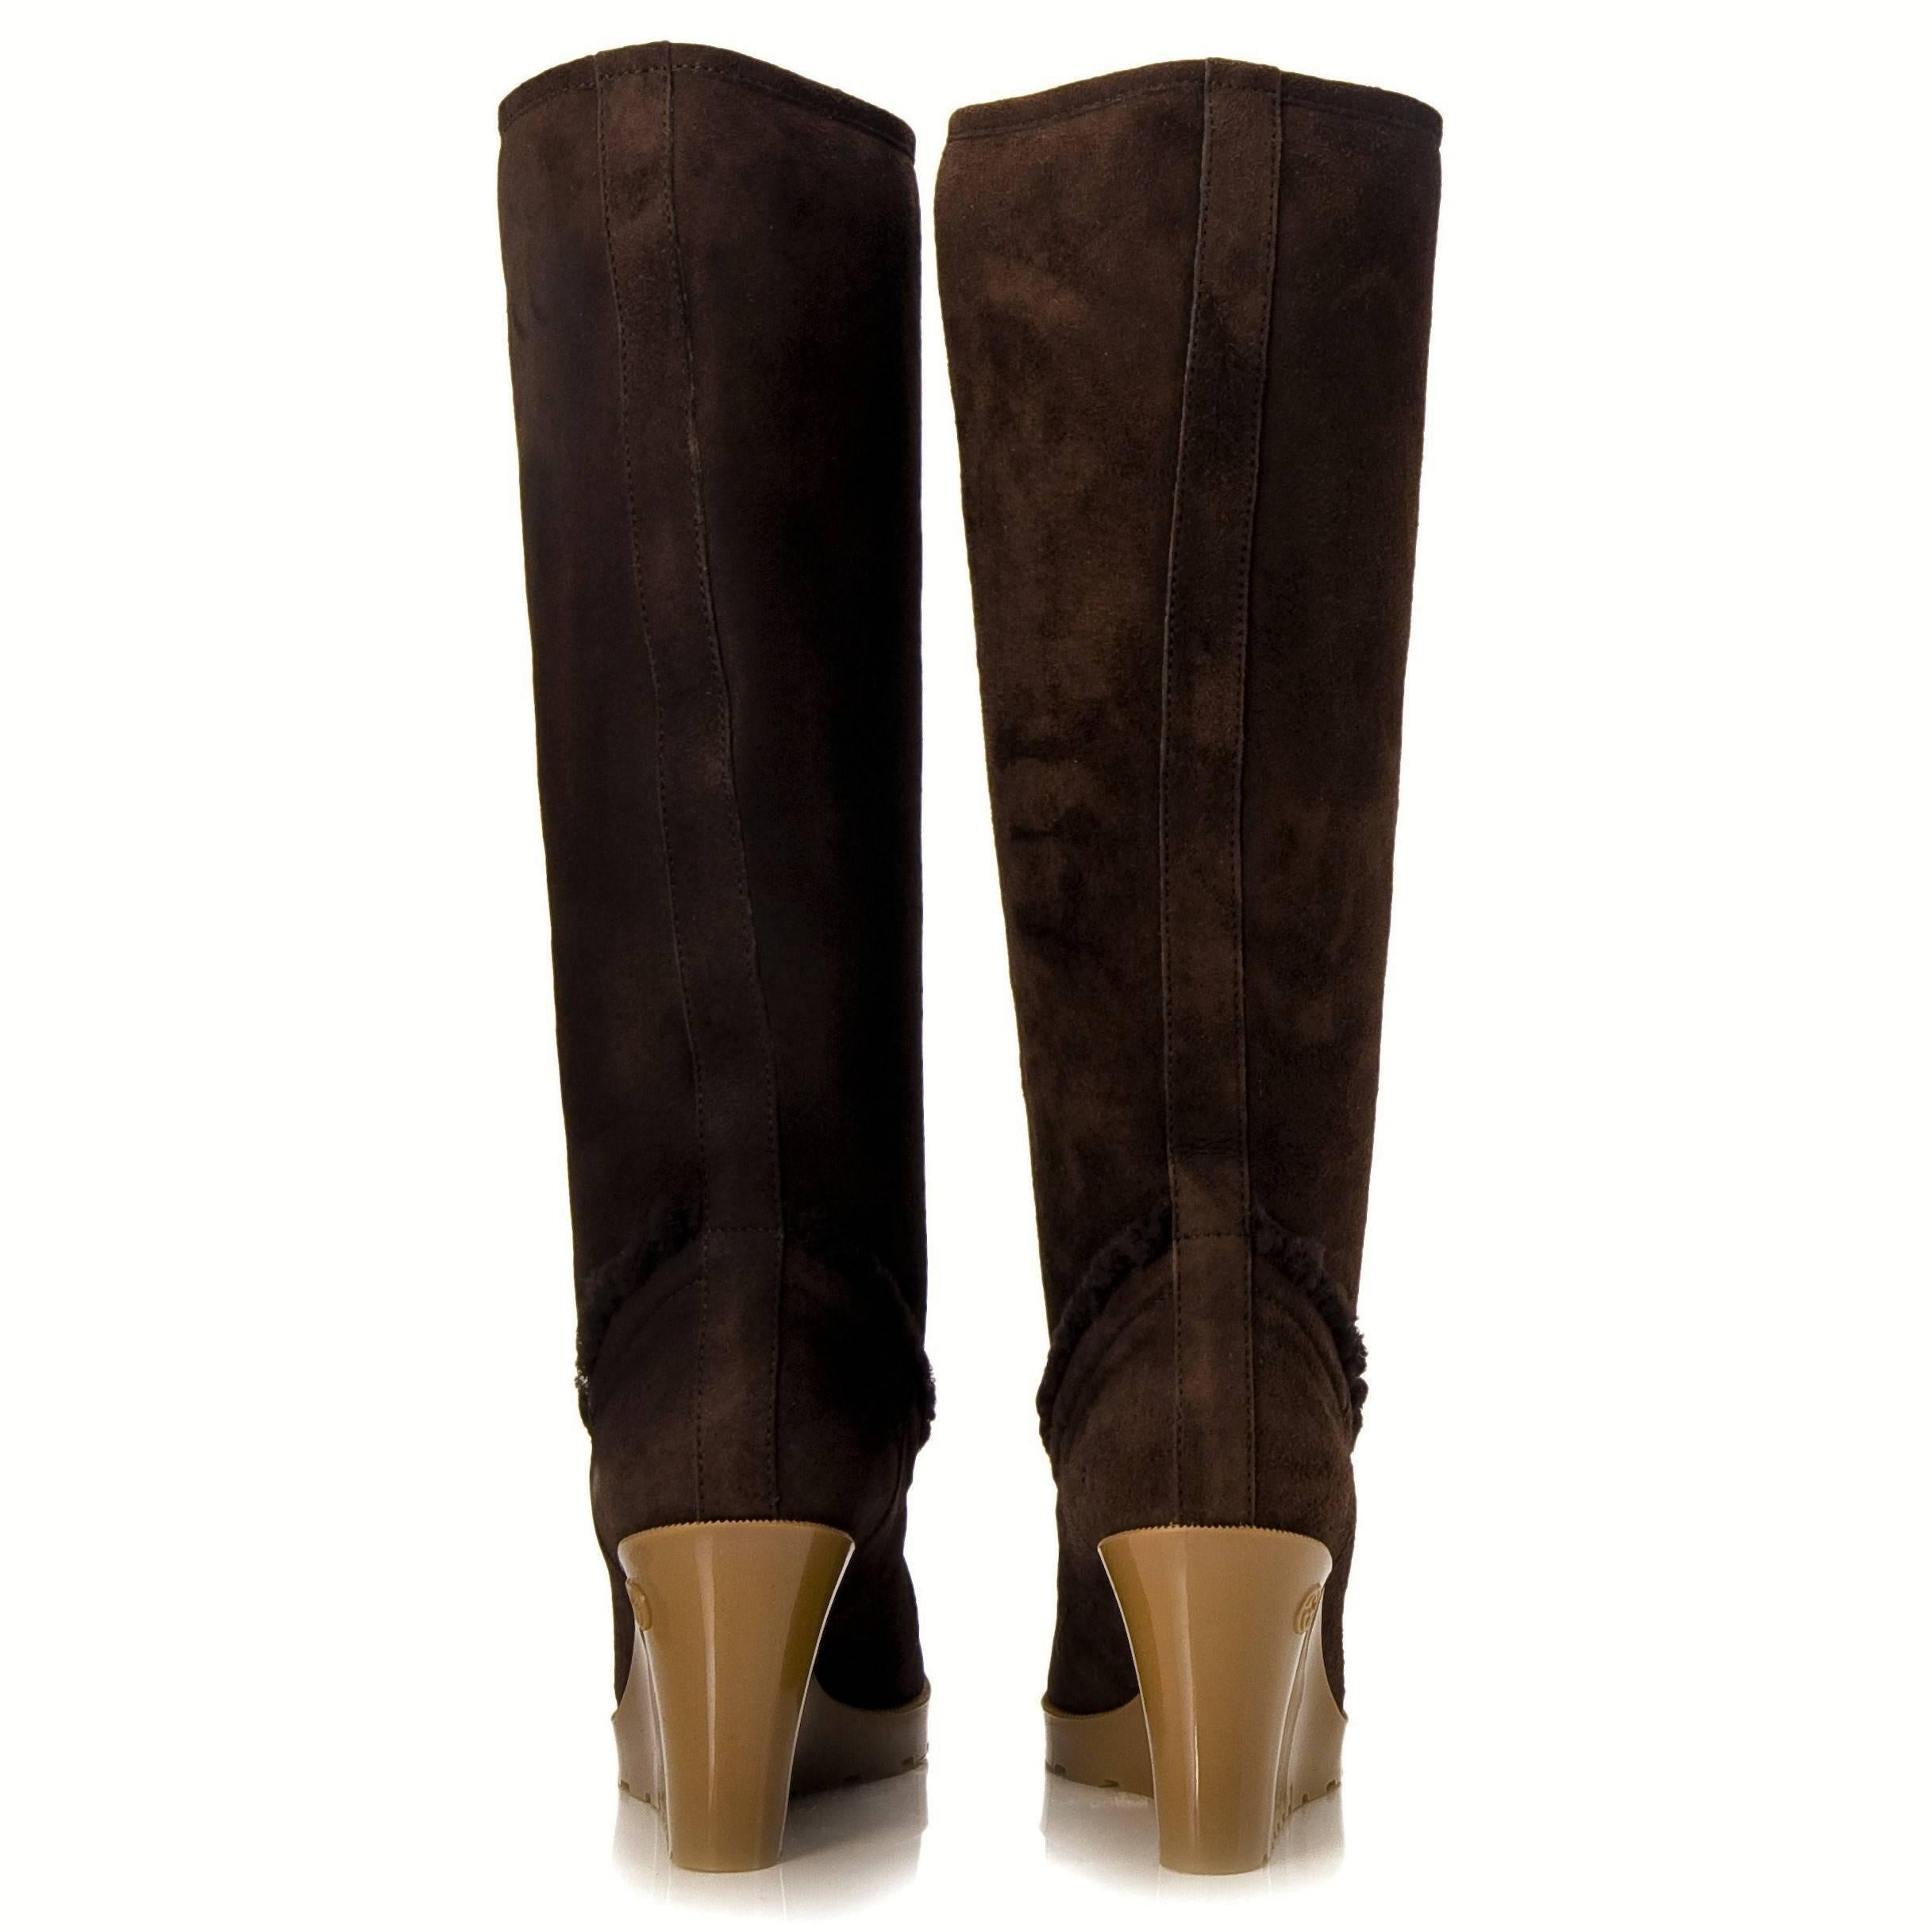 New Gucci Chocolate Brown Shearling Wedge Boots Sz 7 For Sale 3